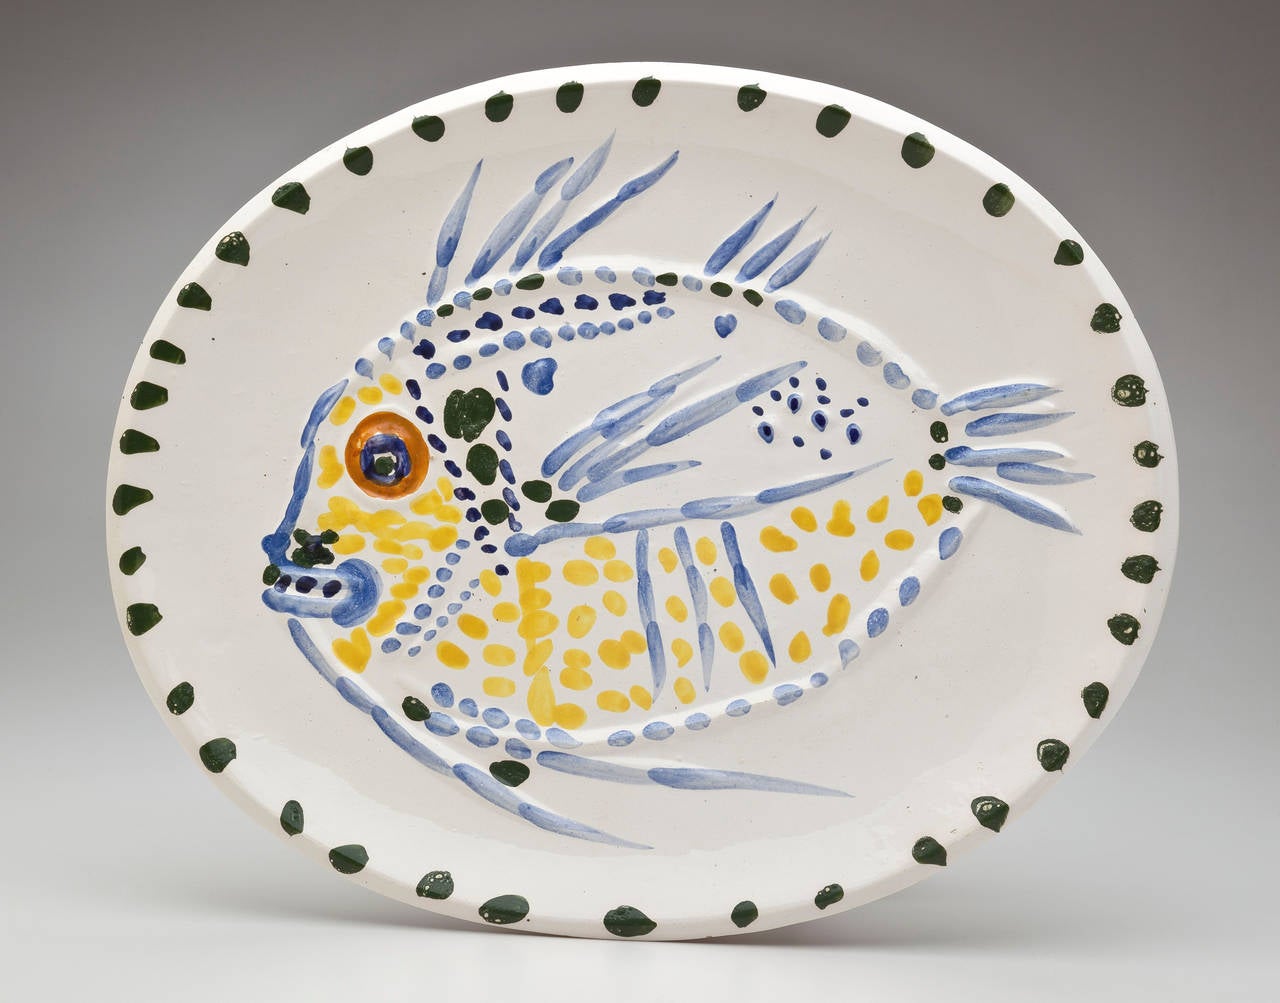 A large ceramic platter with a Fish Design by Pablo Picasso (1881-1973). The spotted yellow and blue fish with an orange eye dominates the glazed oval earthenware dish. The white enamel surface is covered with dots of yellow, green, orange and blue